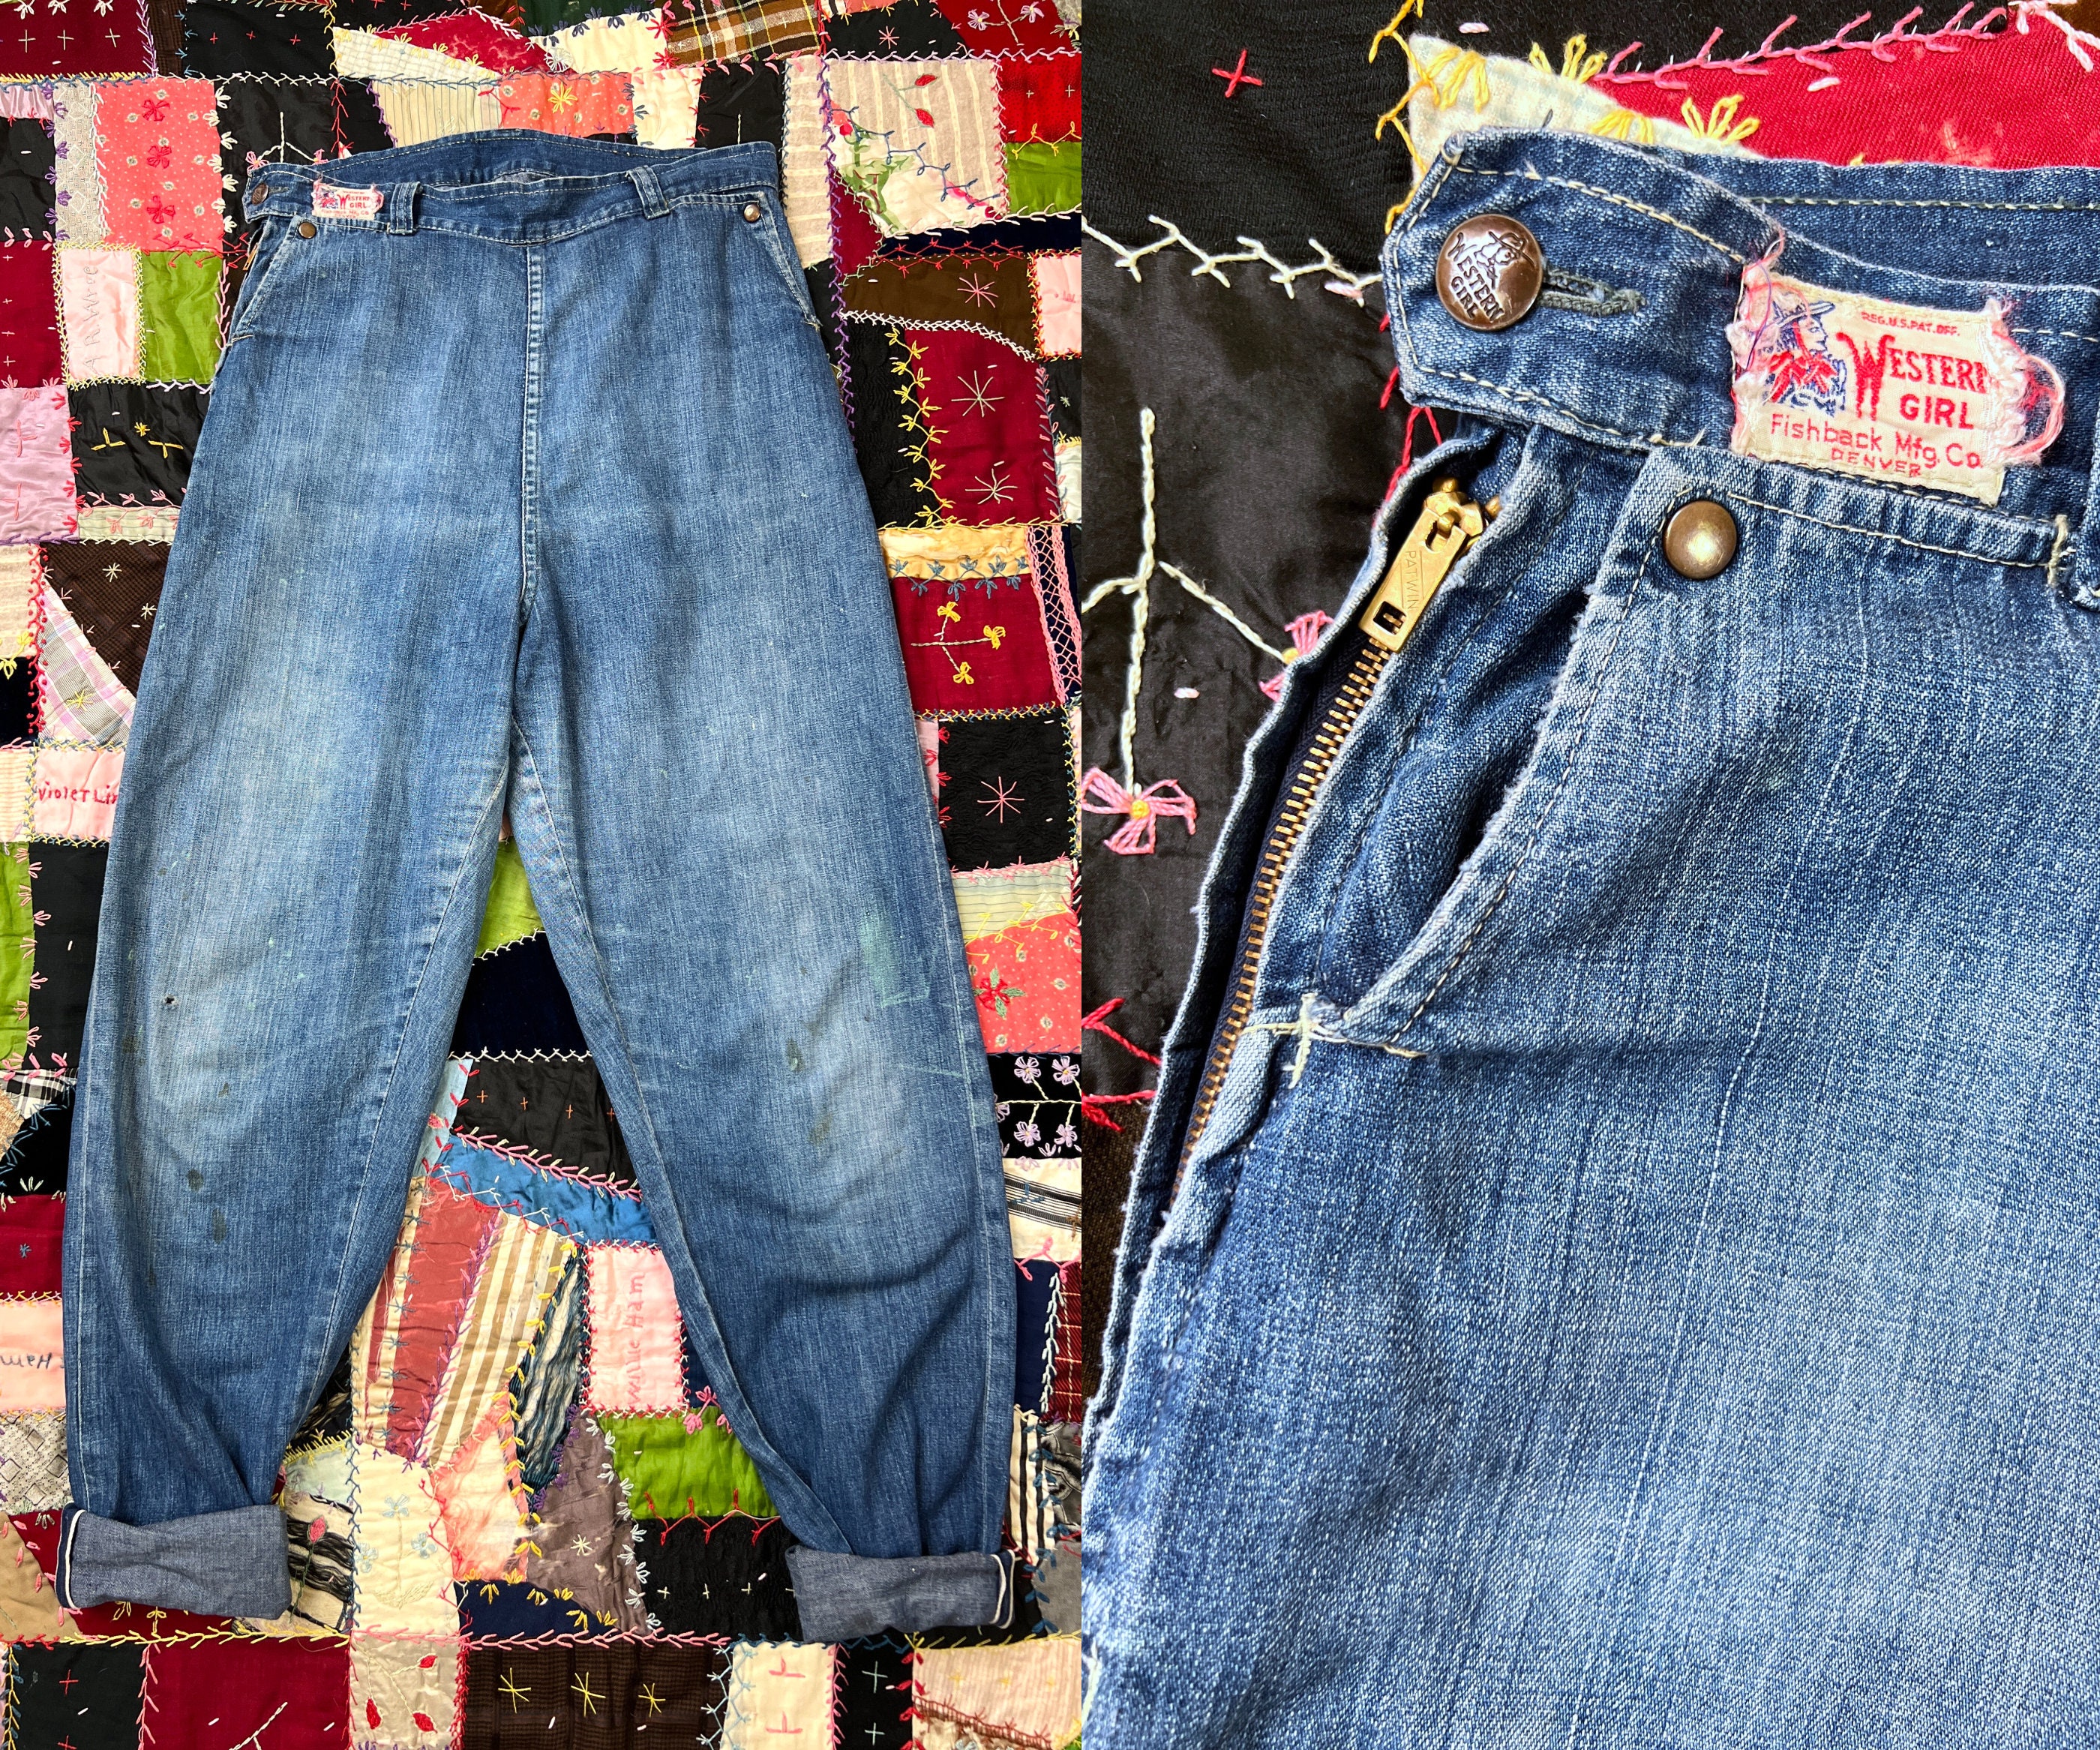 vintage 1940s jeans // western snap side zip indigo blue denim 40s - 50s  jeans // selvage edge cuffs + belt loops + perfect patina